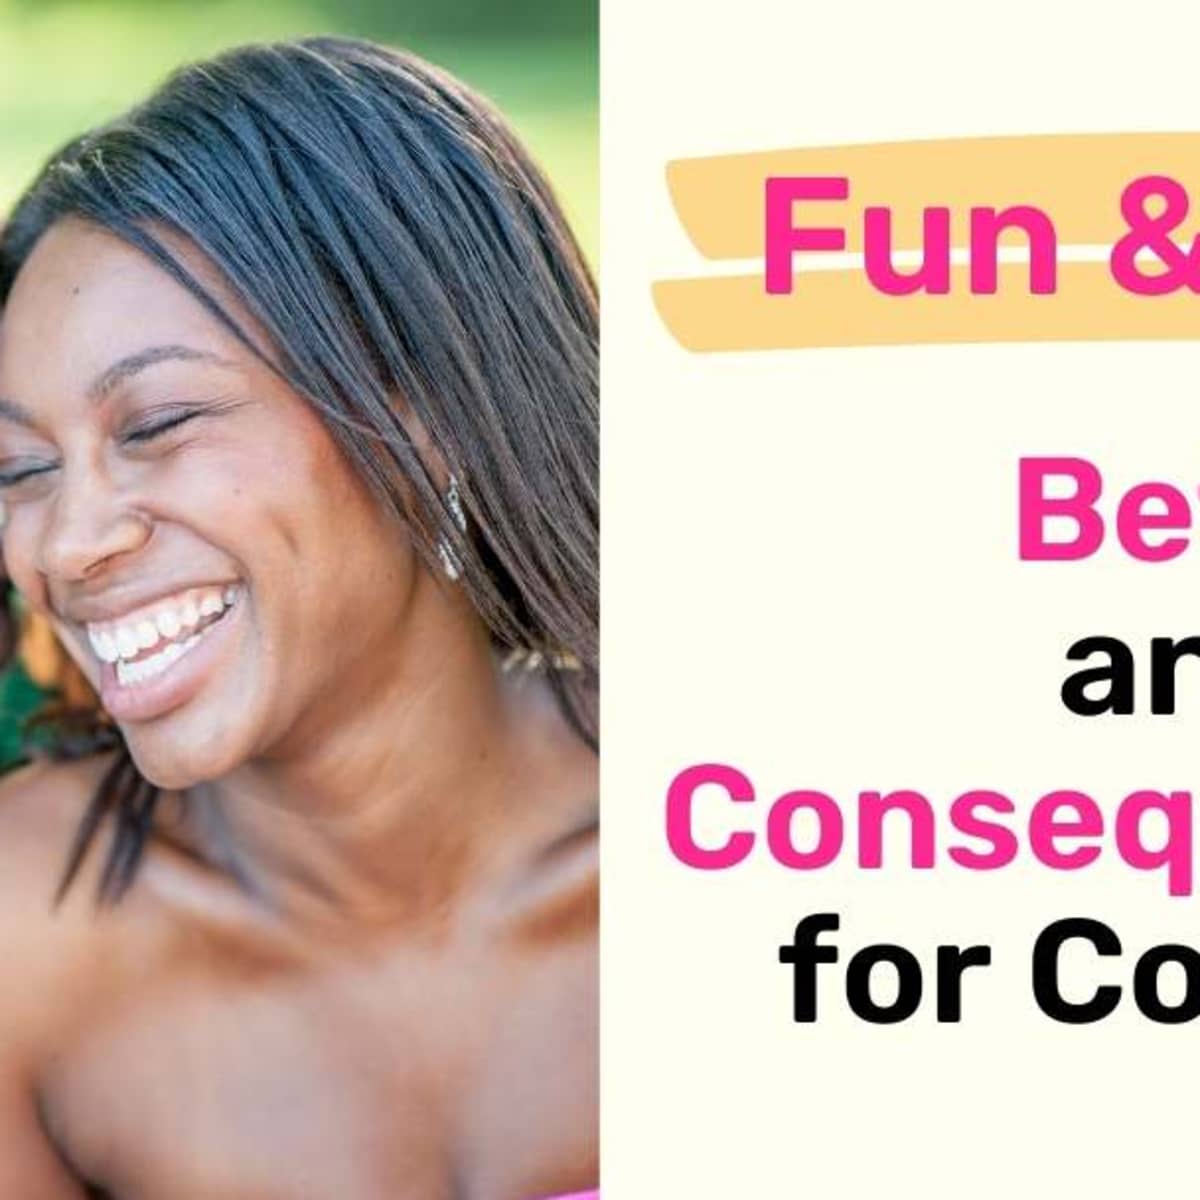 50 Fun Bet Ideas and Consequences for Couples photo